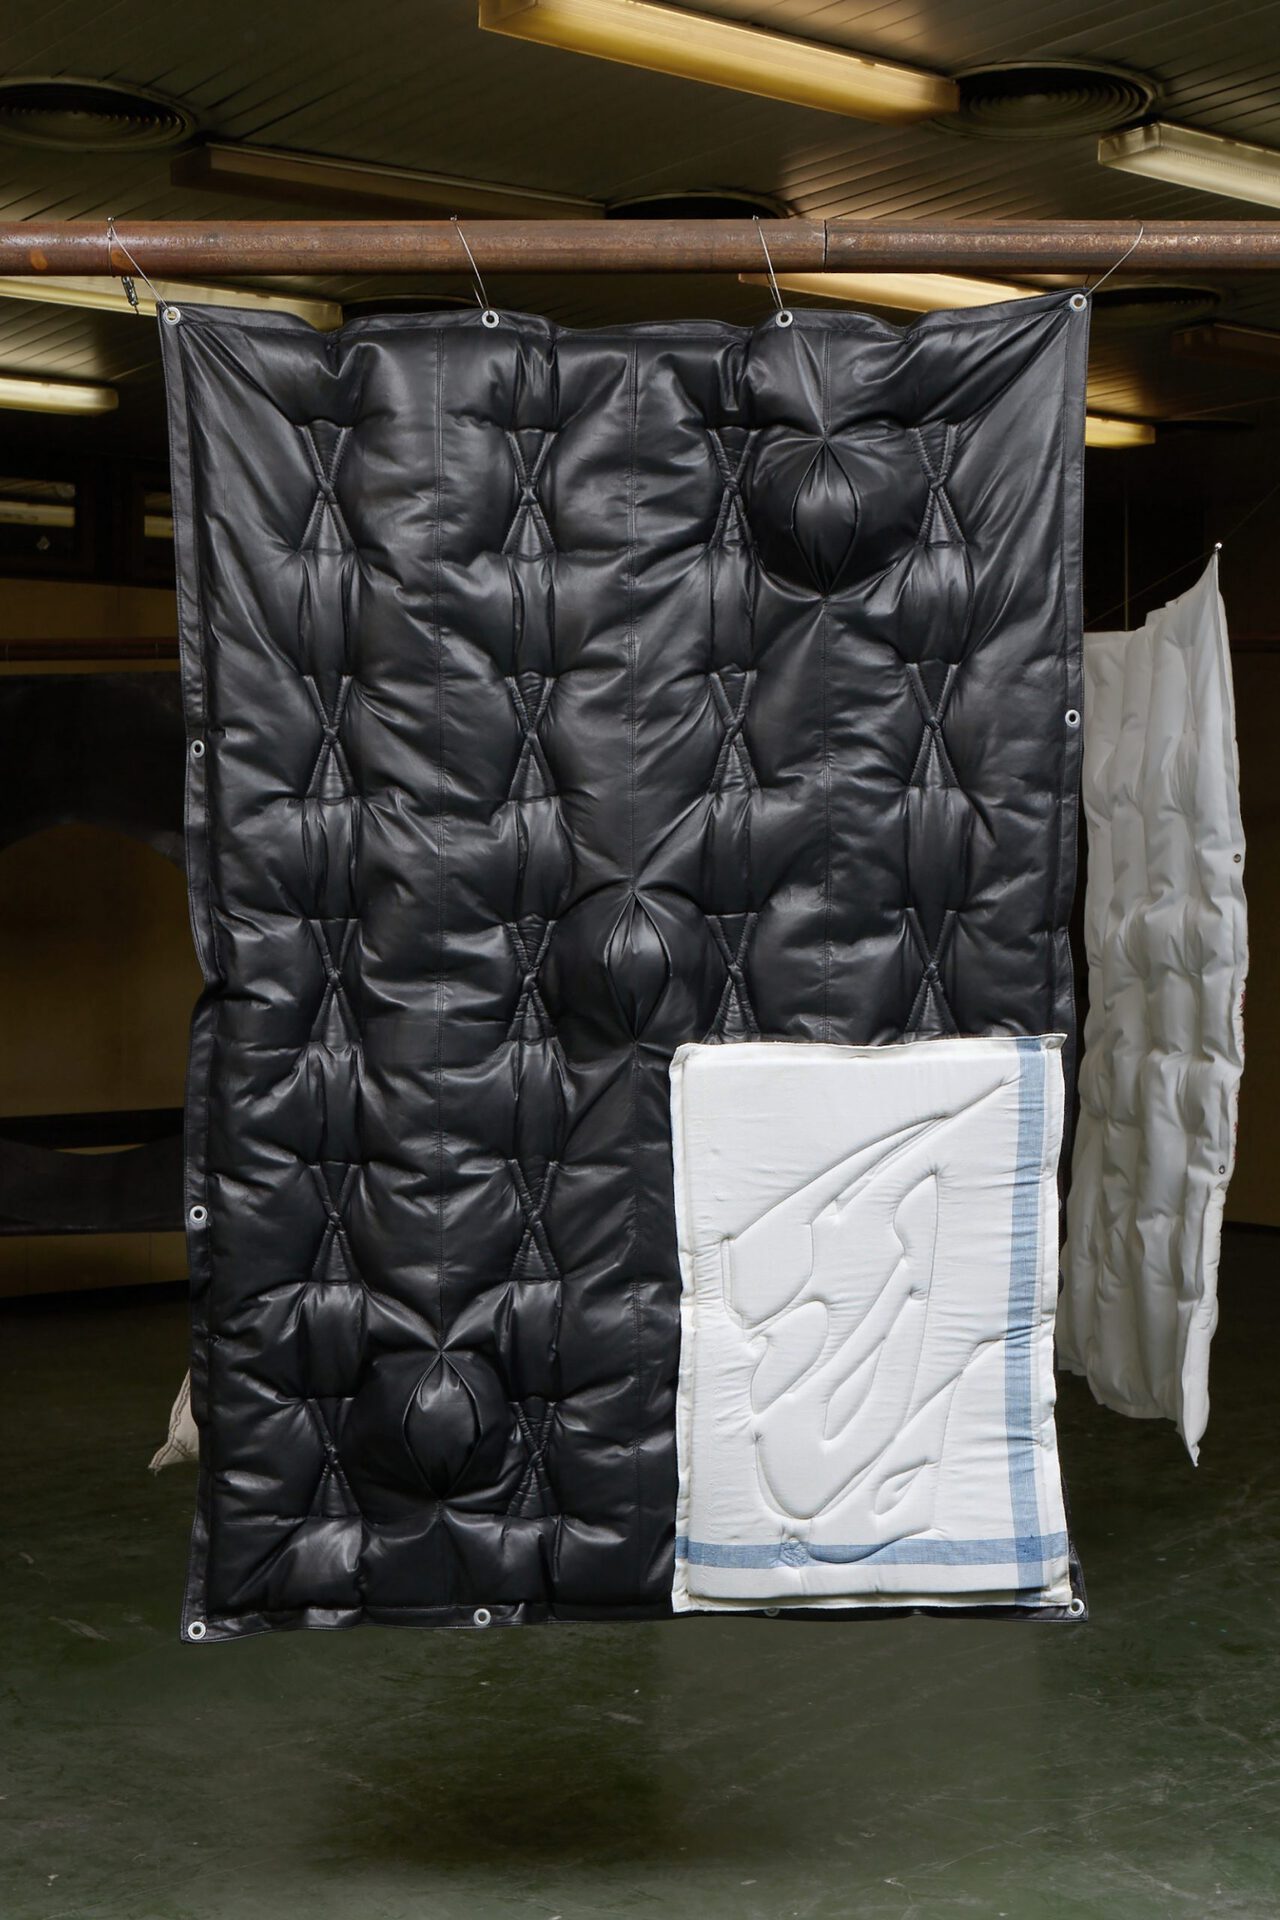 Adrian Kiss, Dunyha Firka 1, 2021, Quilted leather and canvas with acrylic spheres, 200 × 140 cm